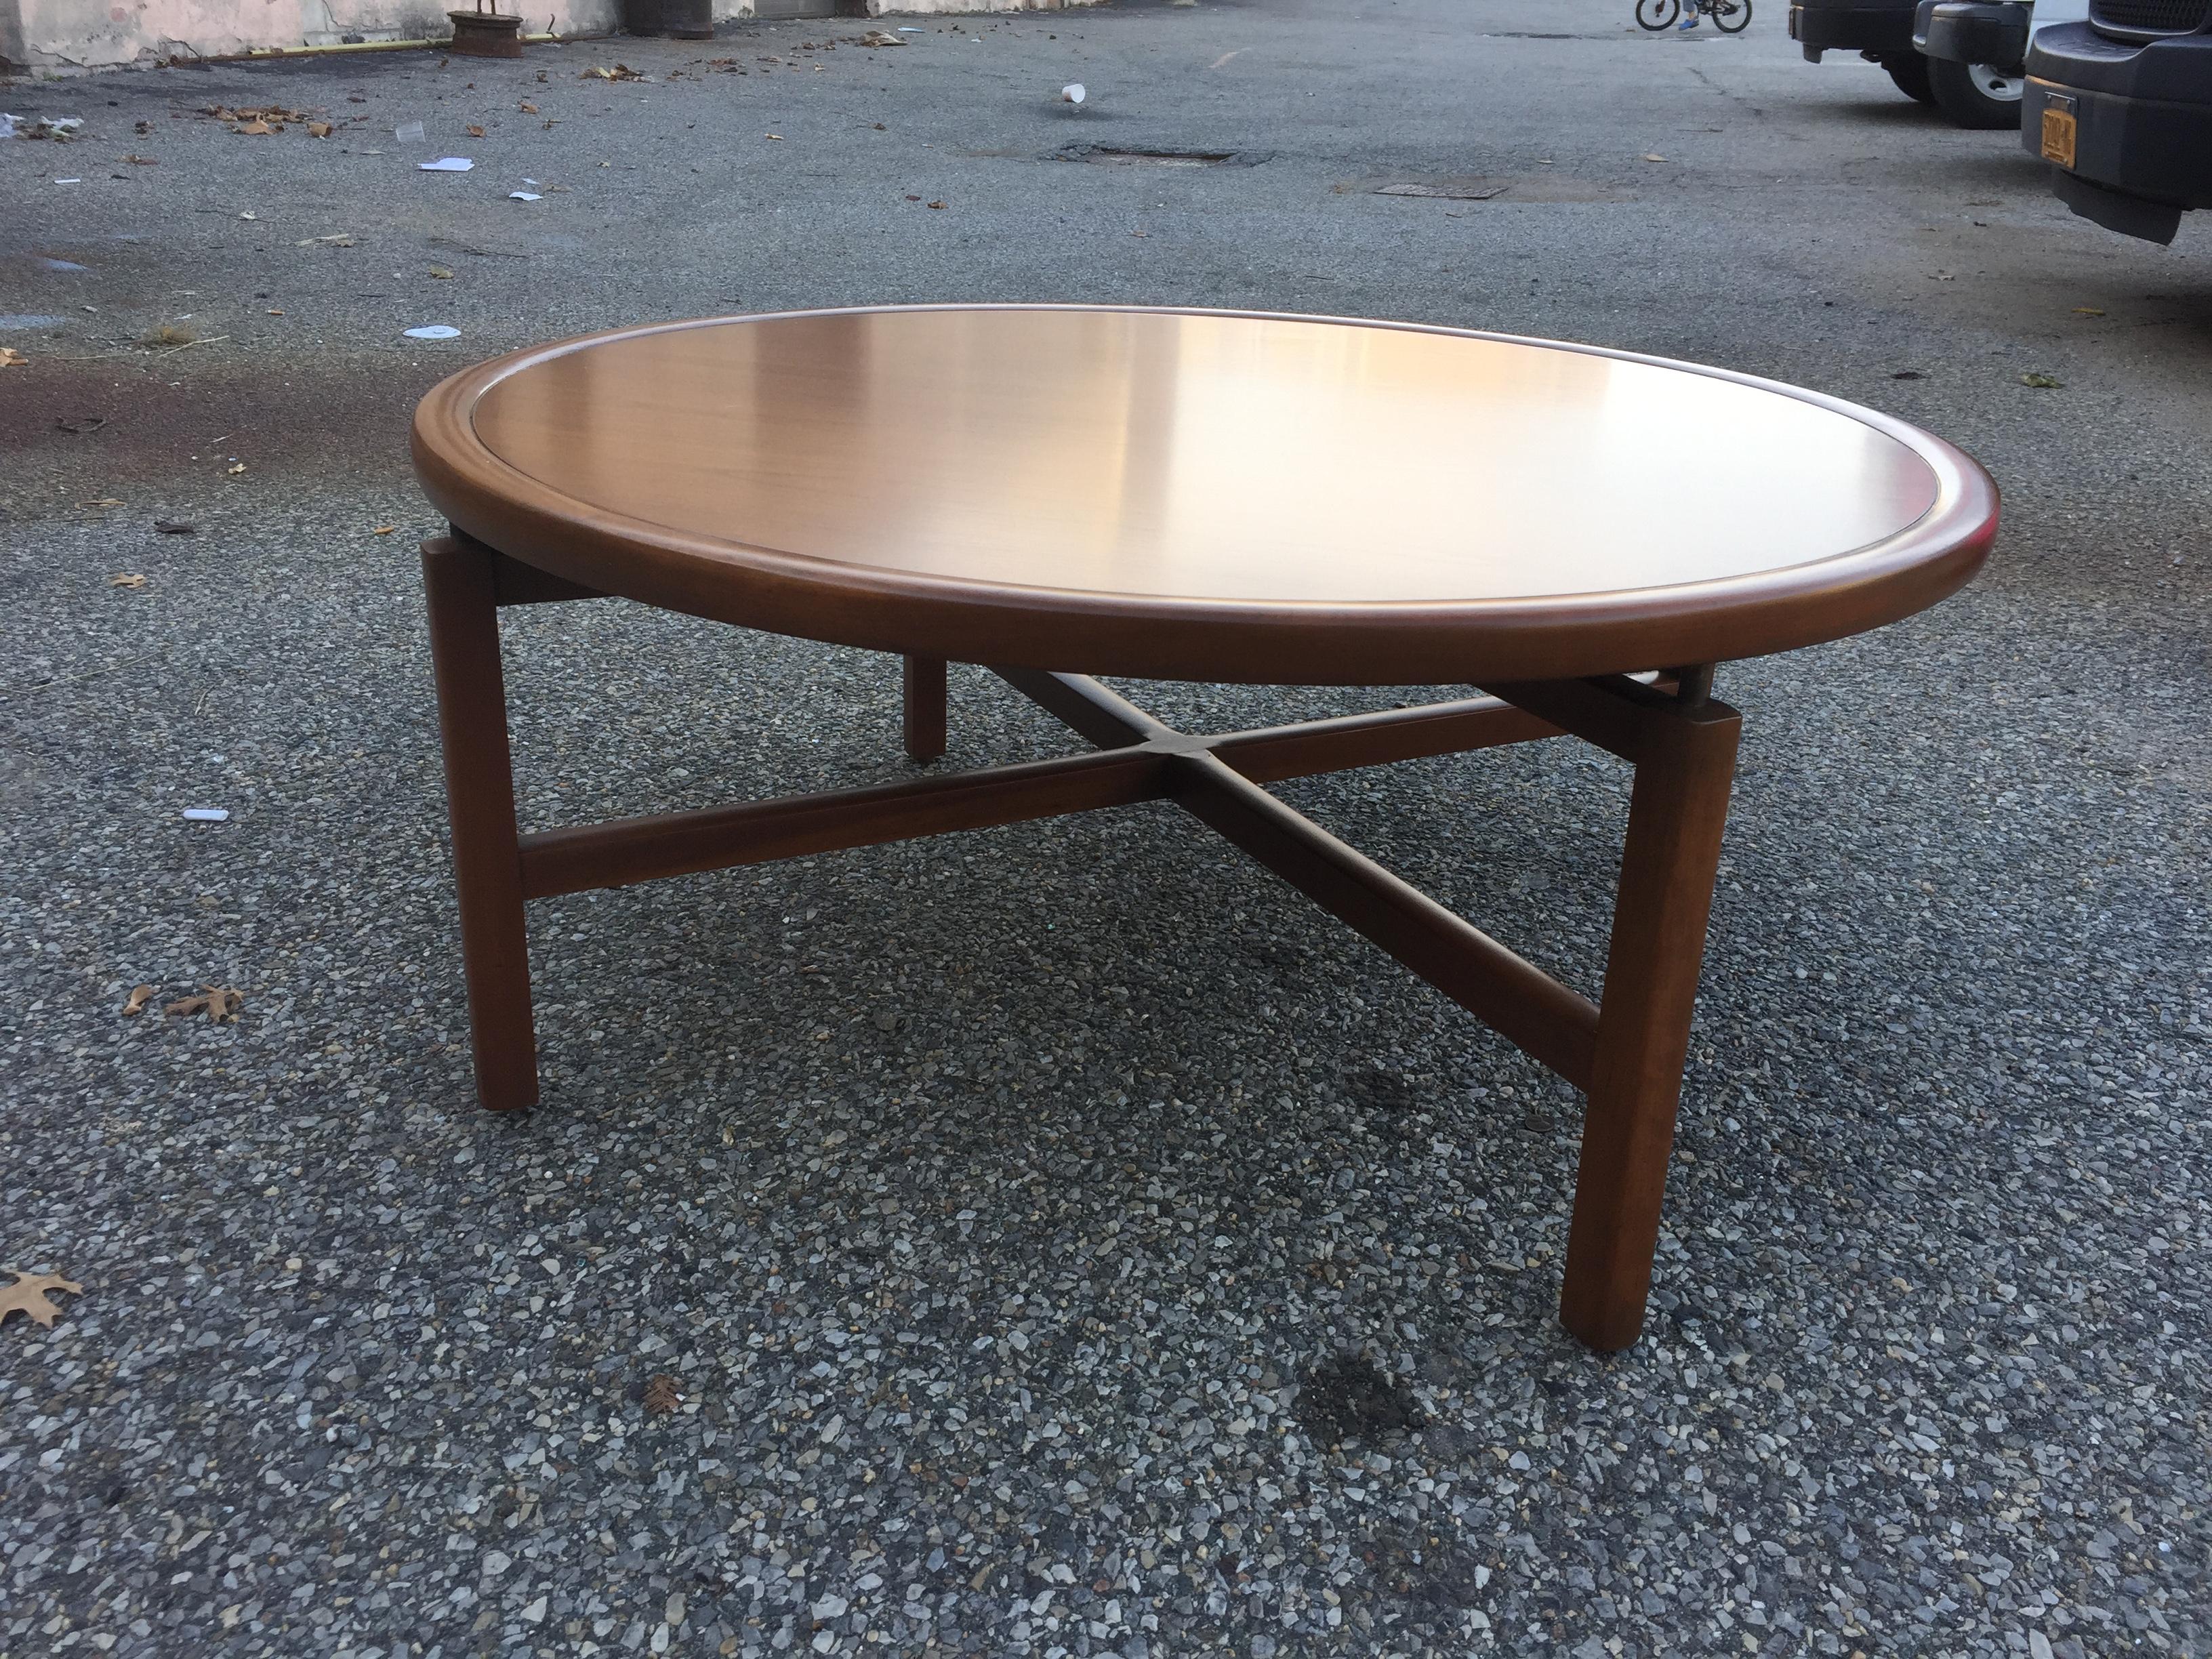 Mid-Century Modern Poul Kjaerholm Attributed Cocktail Table For Sale